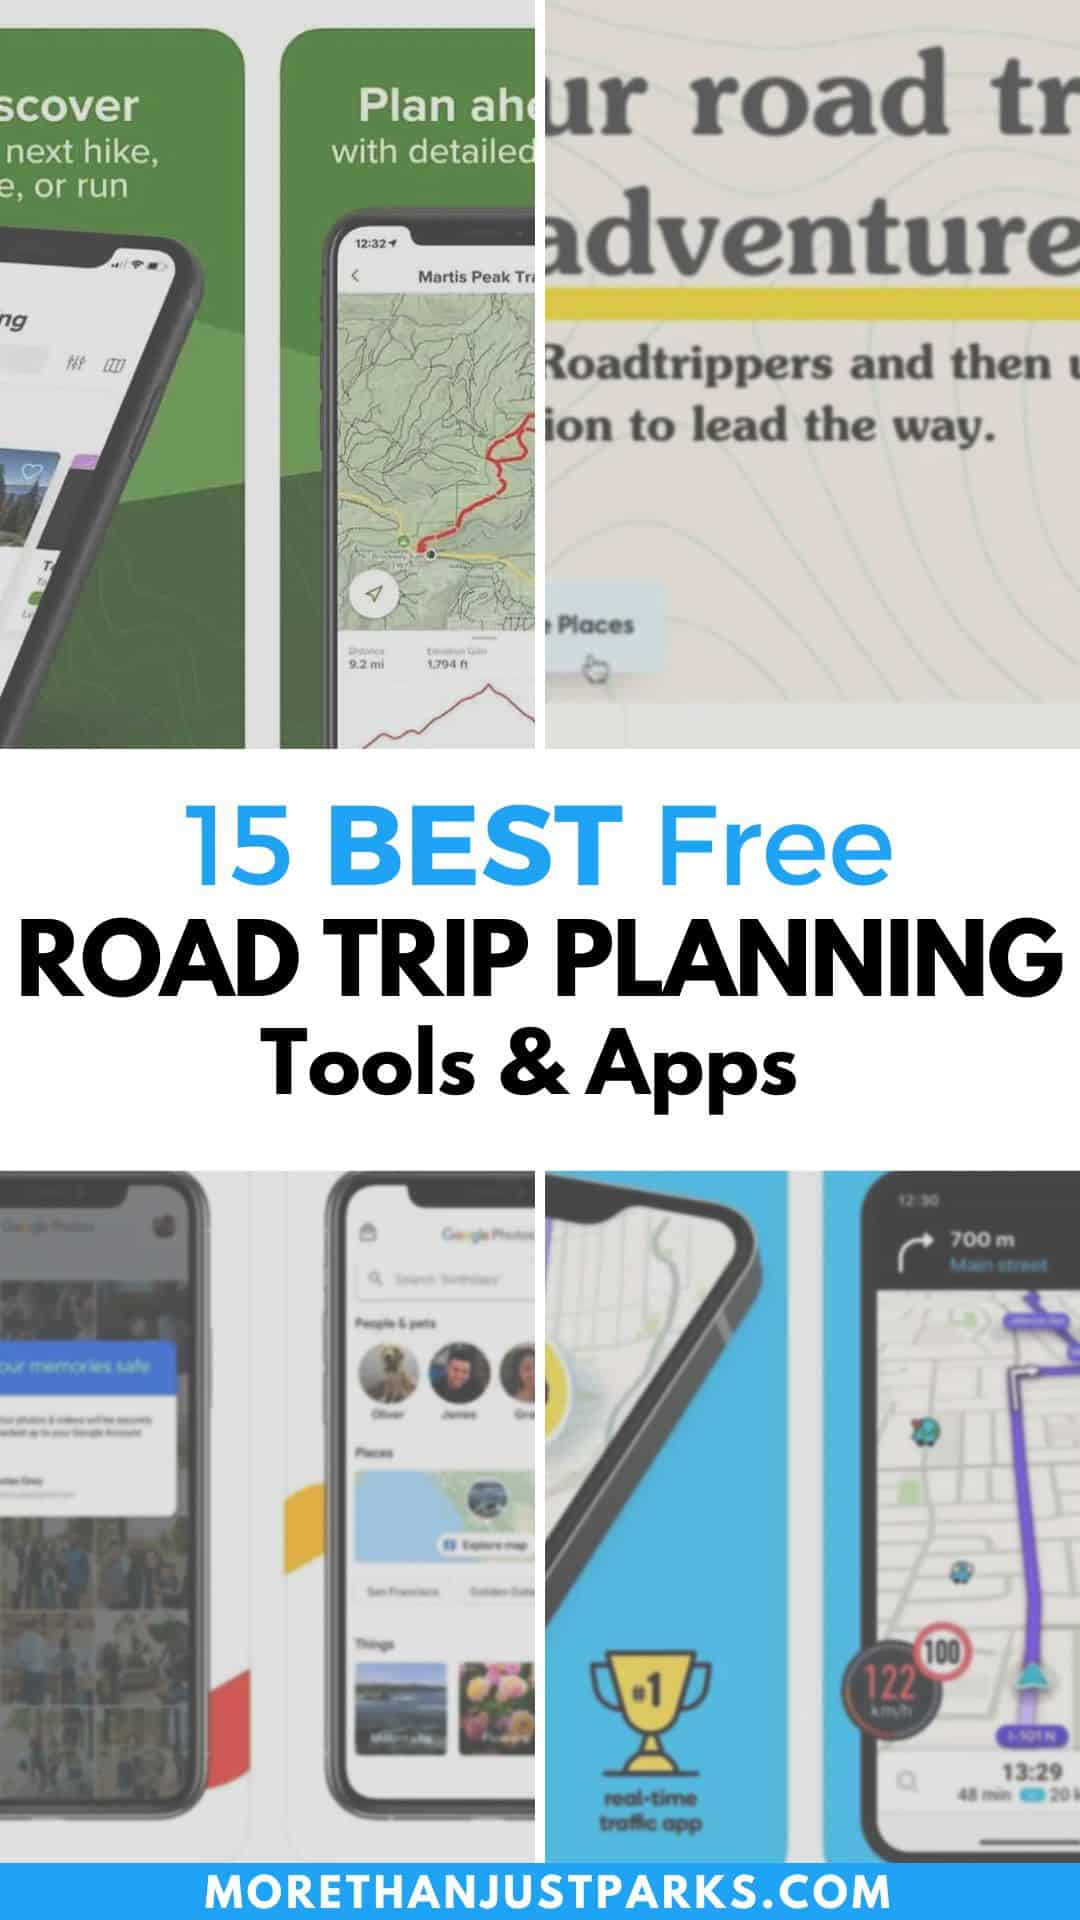 road trip planning tools, road trip planning apps